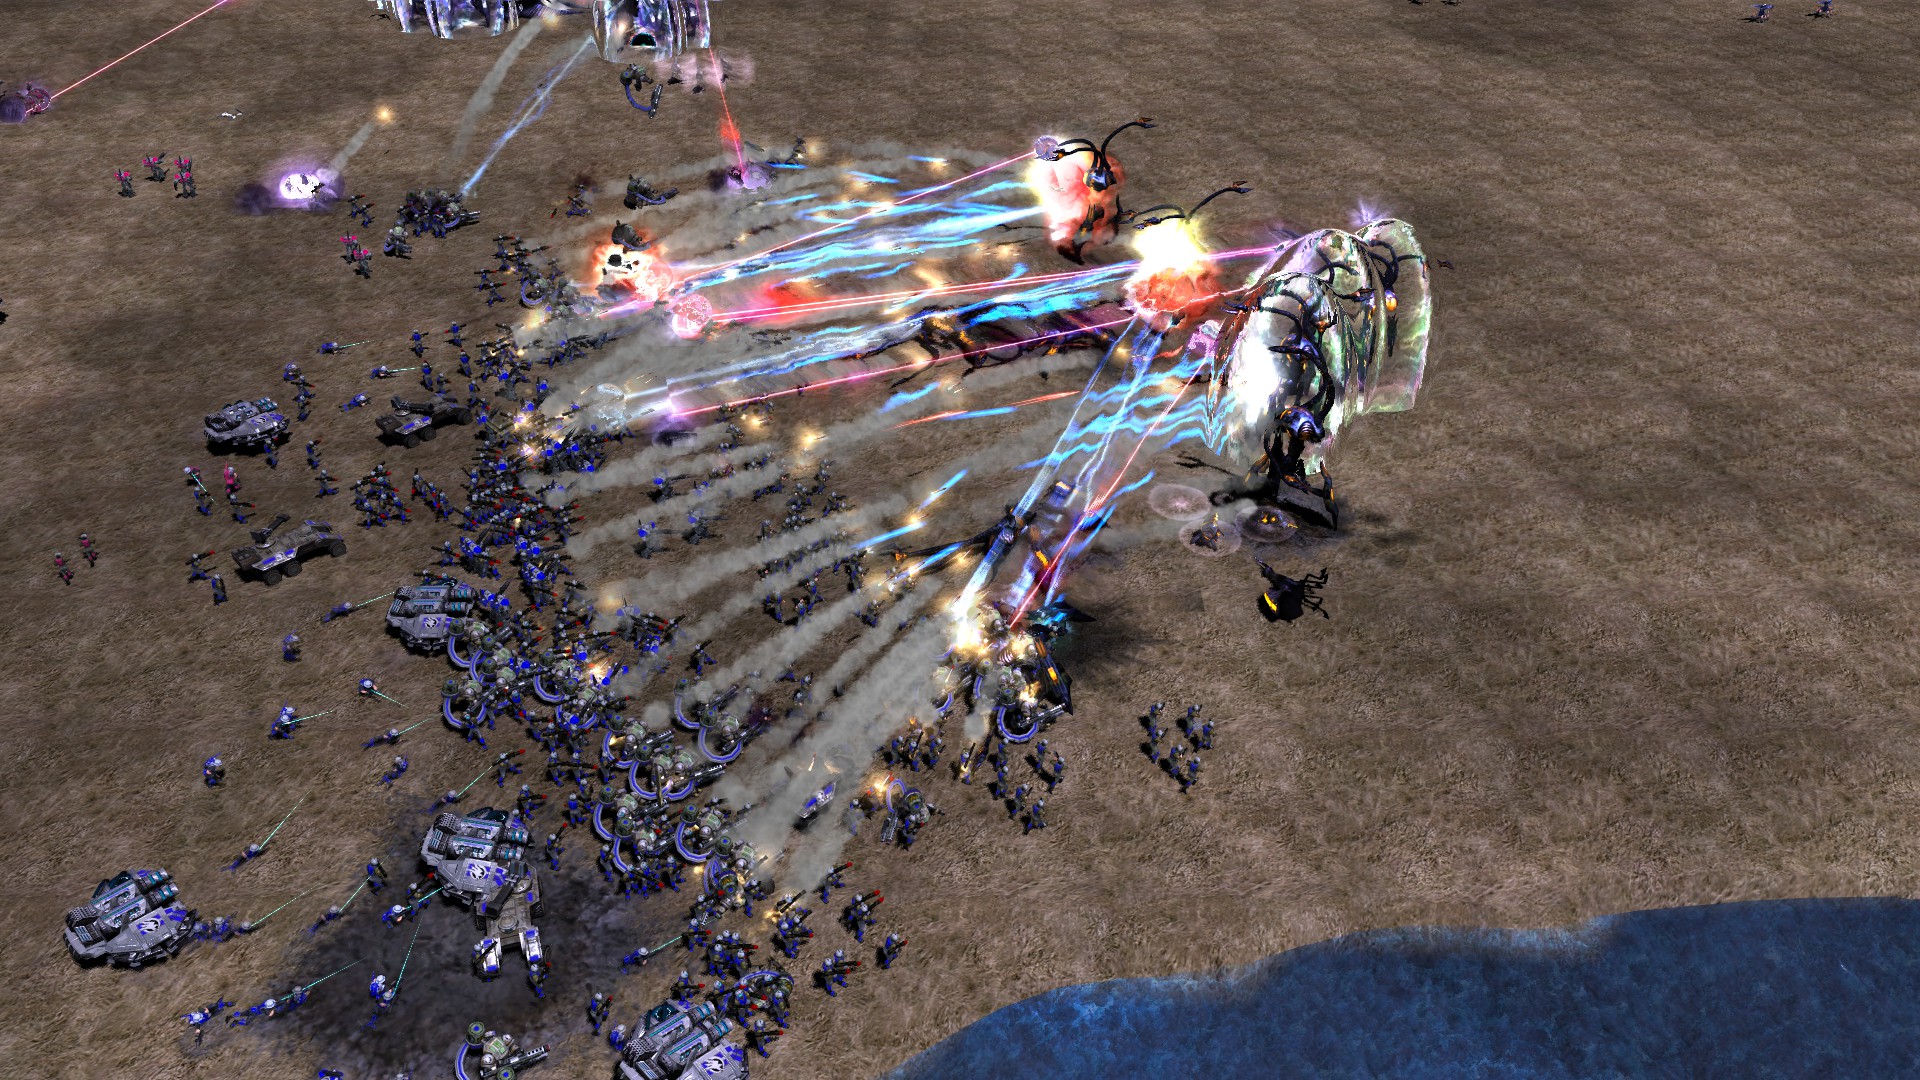 command and conquer 3 kanes wrath best faction